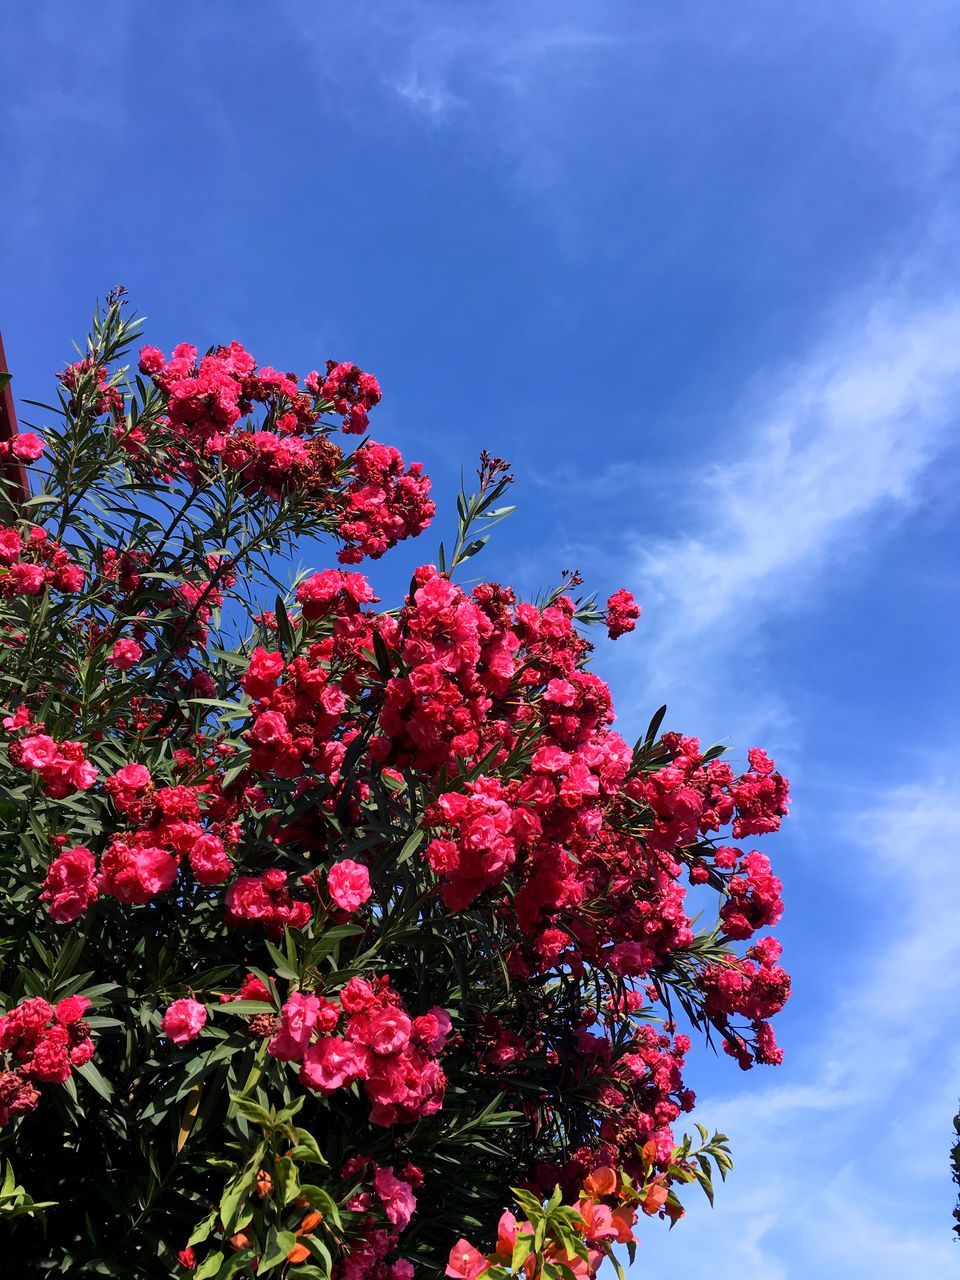 flower, growth, fragility, beauty in nature, freshness, nature, low angle view, red, petal, blossom, pink color, outdoors, day, plant, springtime, sky, tree, blooming, cloud - sky, no people, flower head, close-up